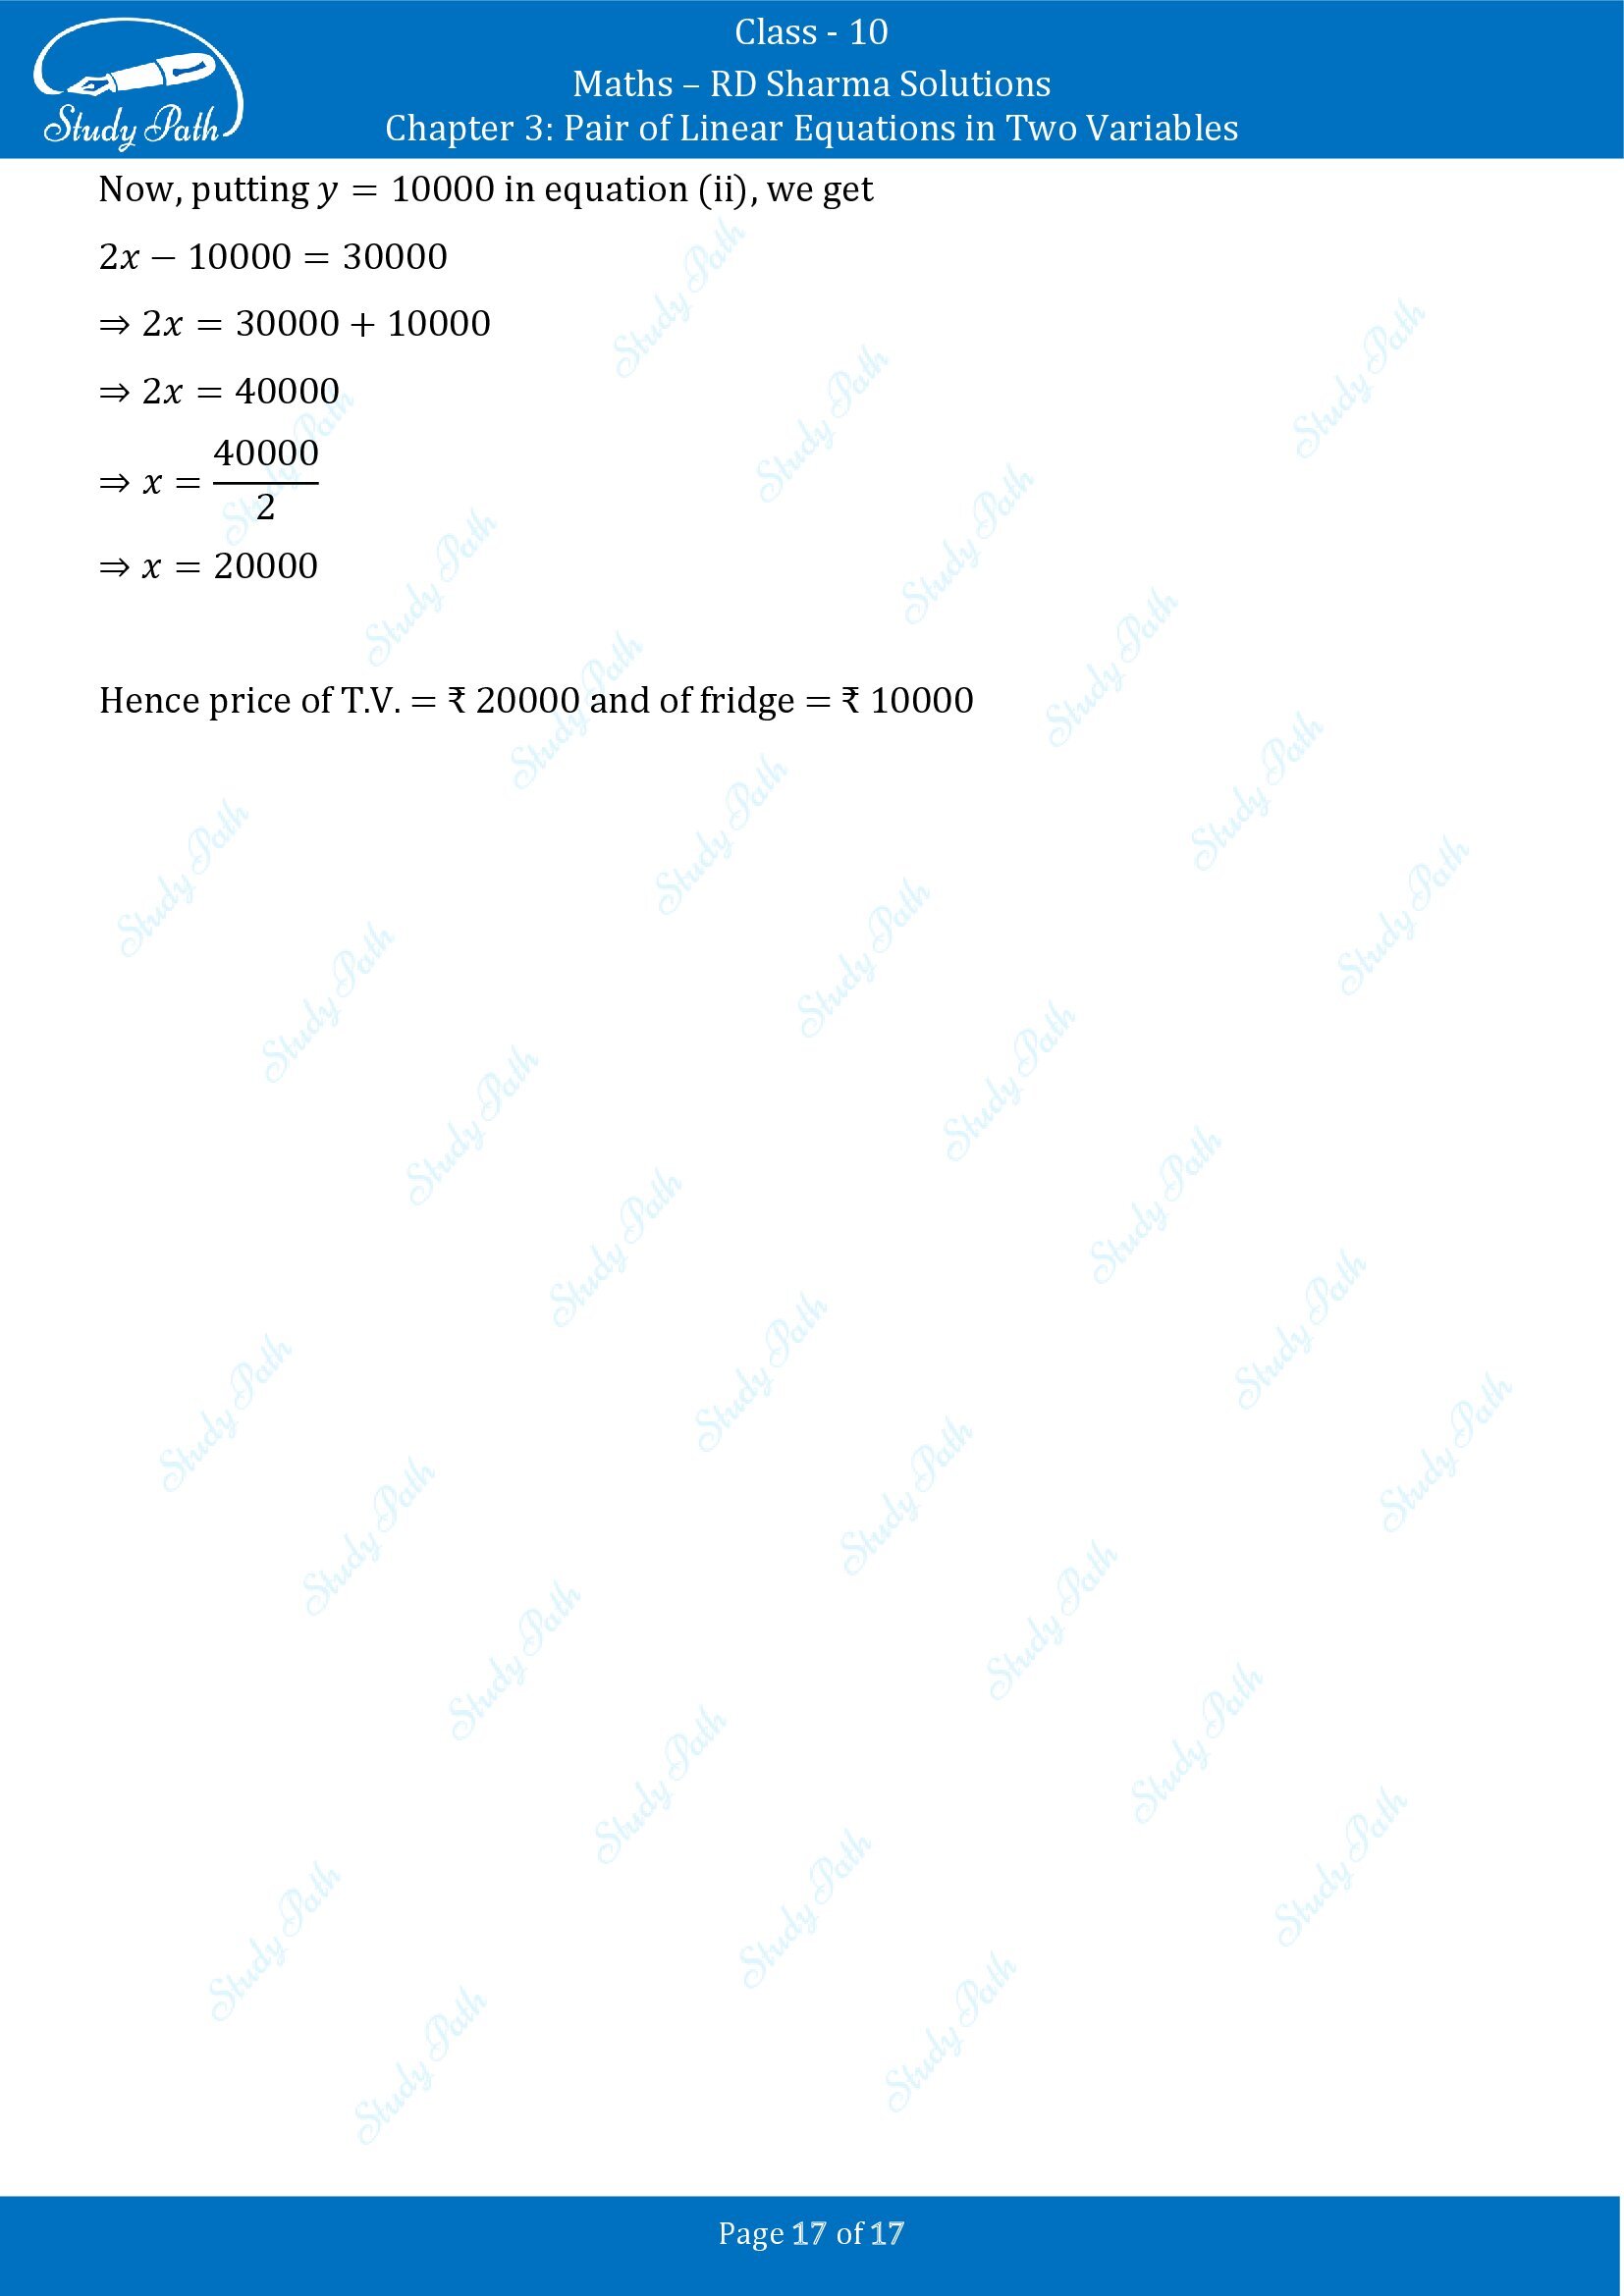 RD Sharma Solutions Class 10 Chapter 3 Pair of Linear Equations in Two Variables Exercise 3.6 00017